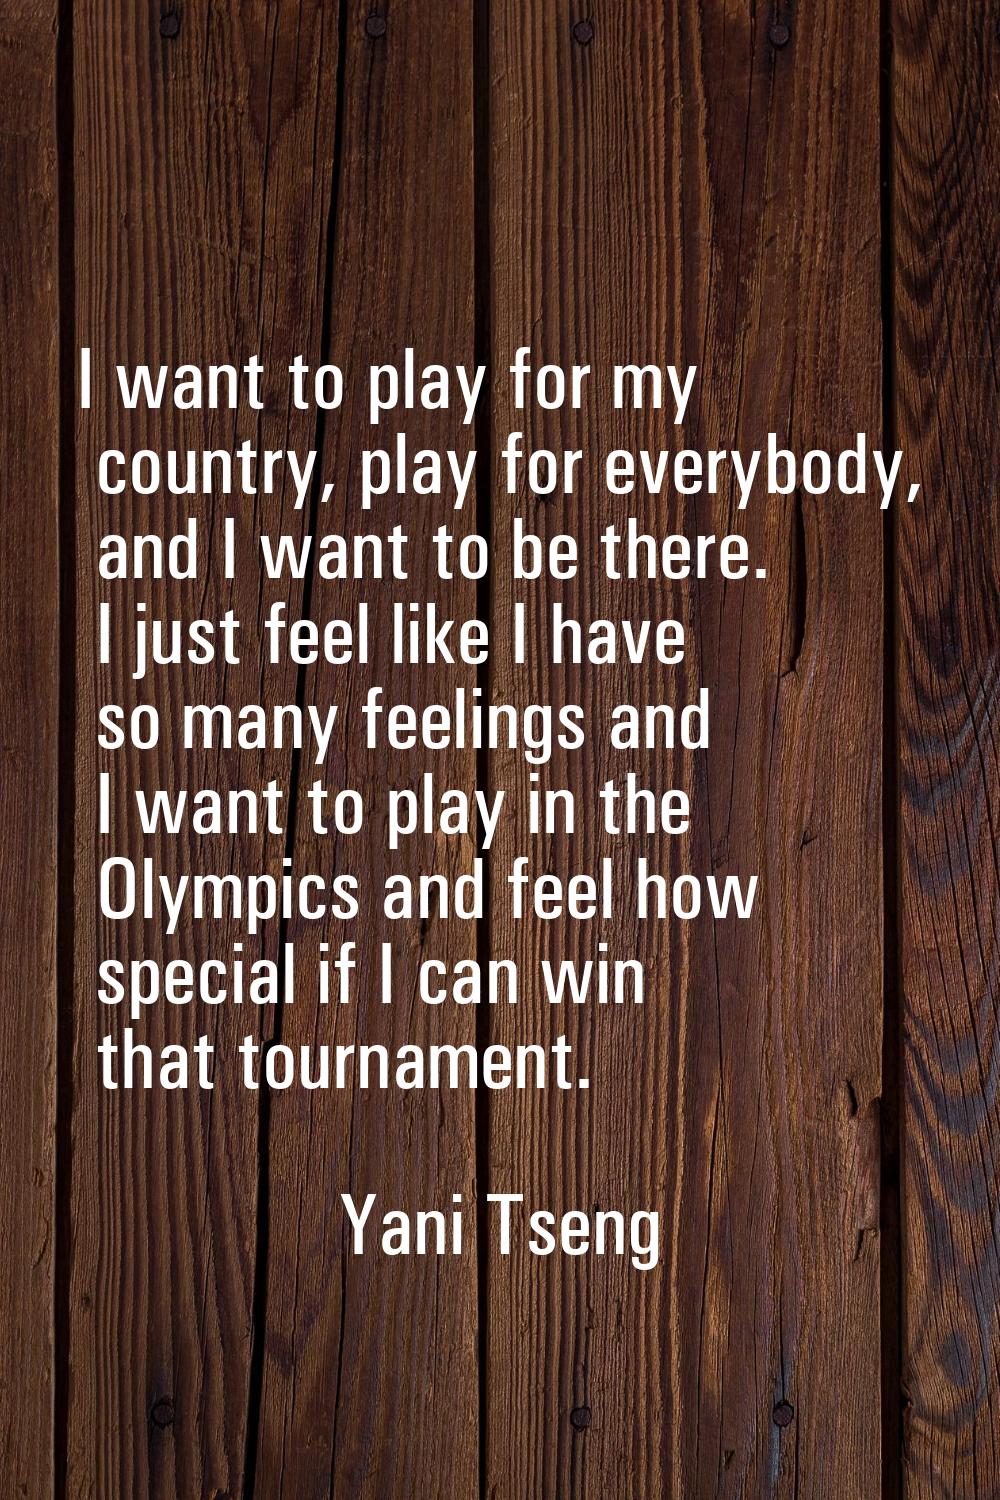 I want to play for my country, play for everybody, and I want to be there. I just feel like I have 